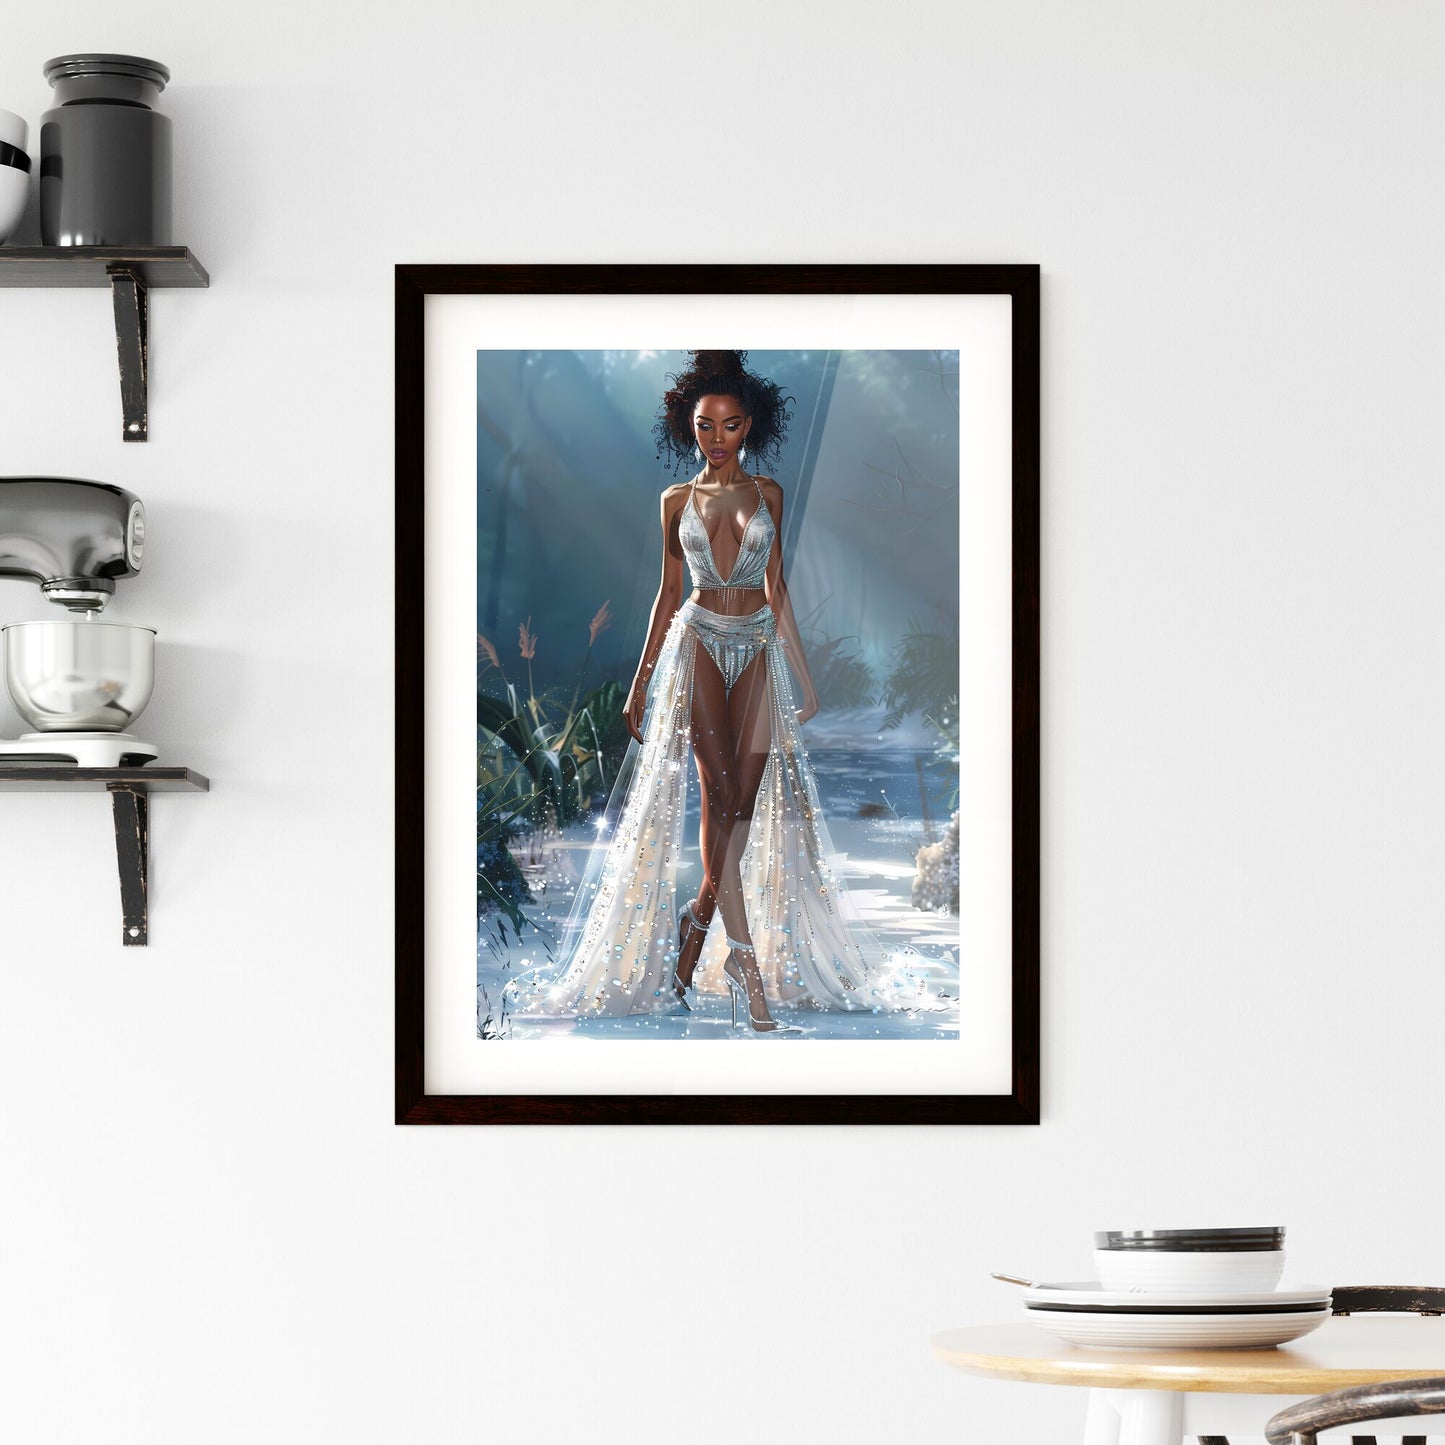 Ethereal Art Deco Lady in Watercolor: Dreamy Painted Woman with Shimmering Dress and Sparkling Heels Default Title